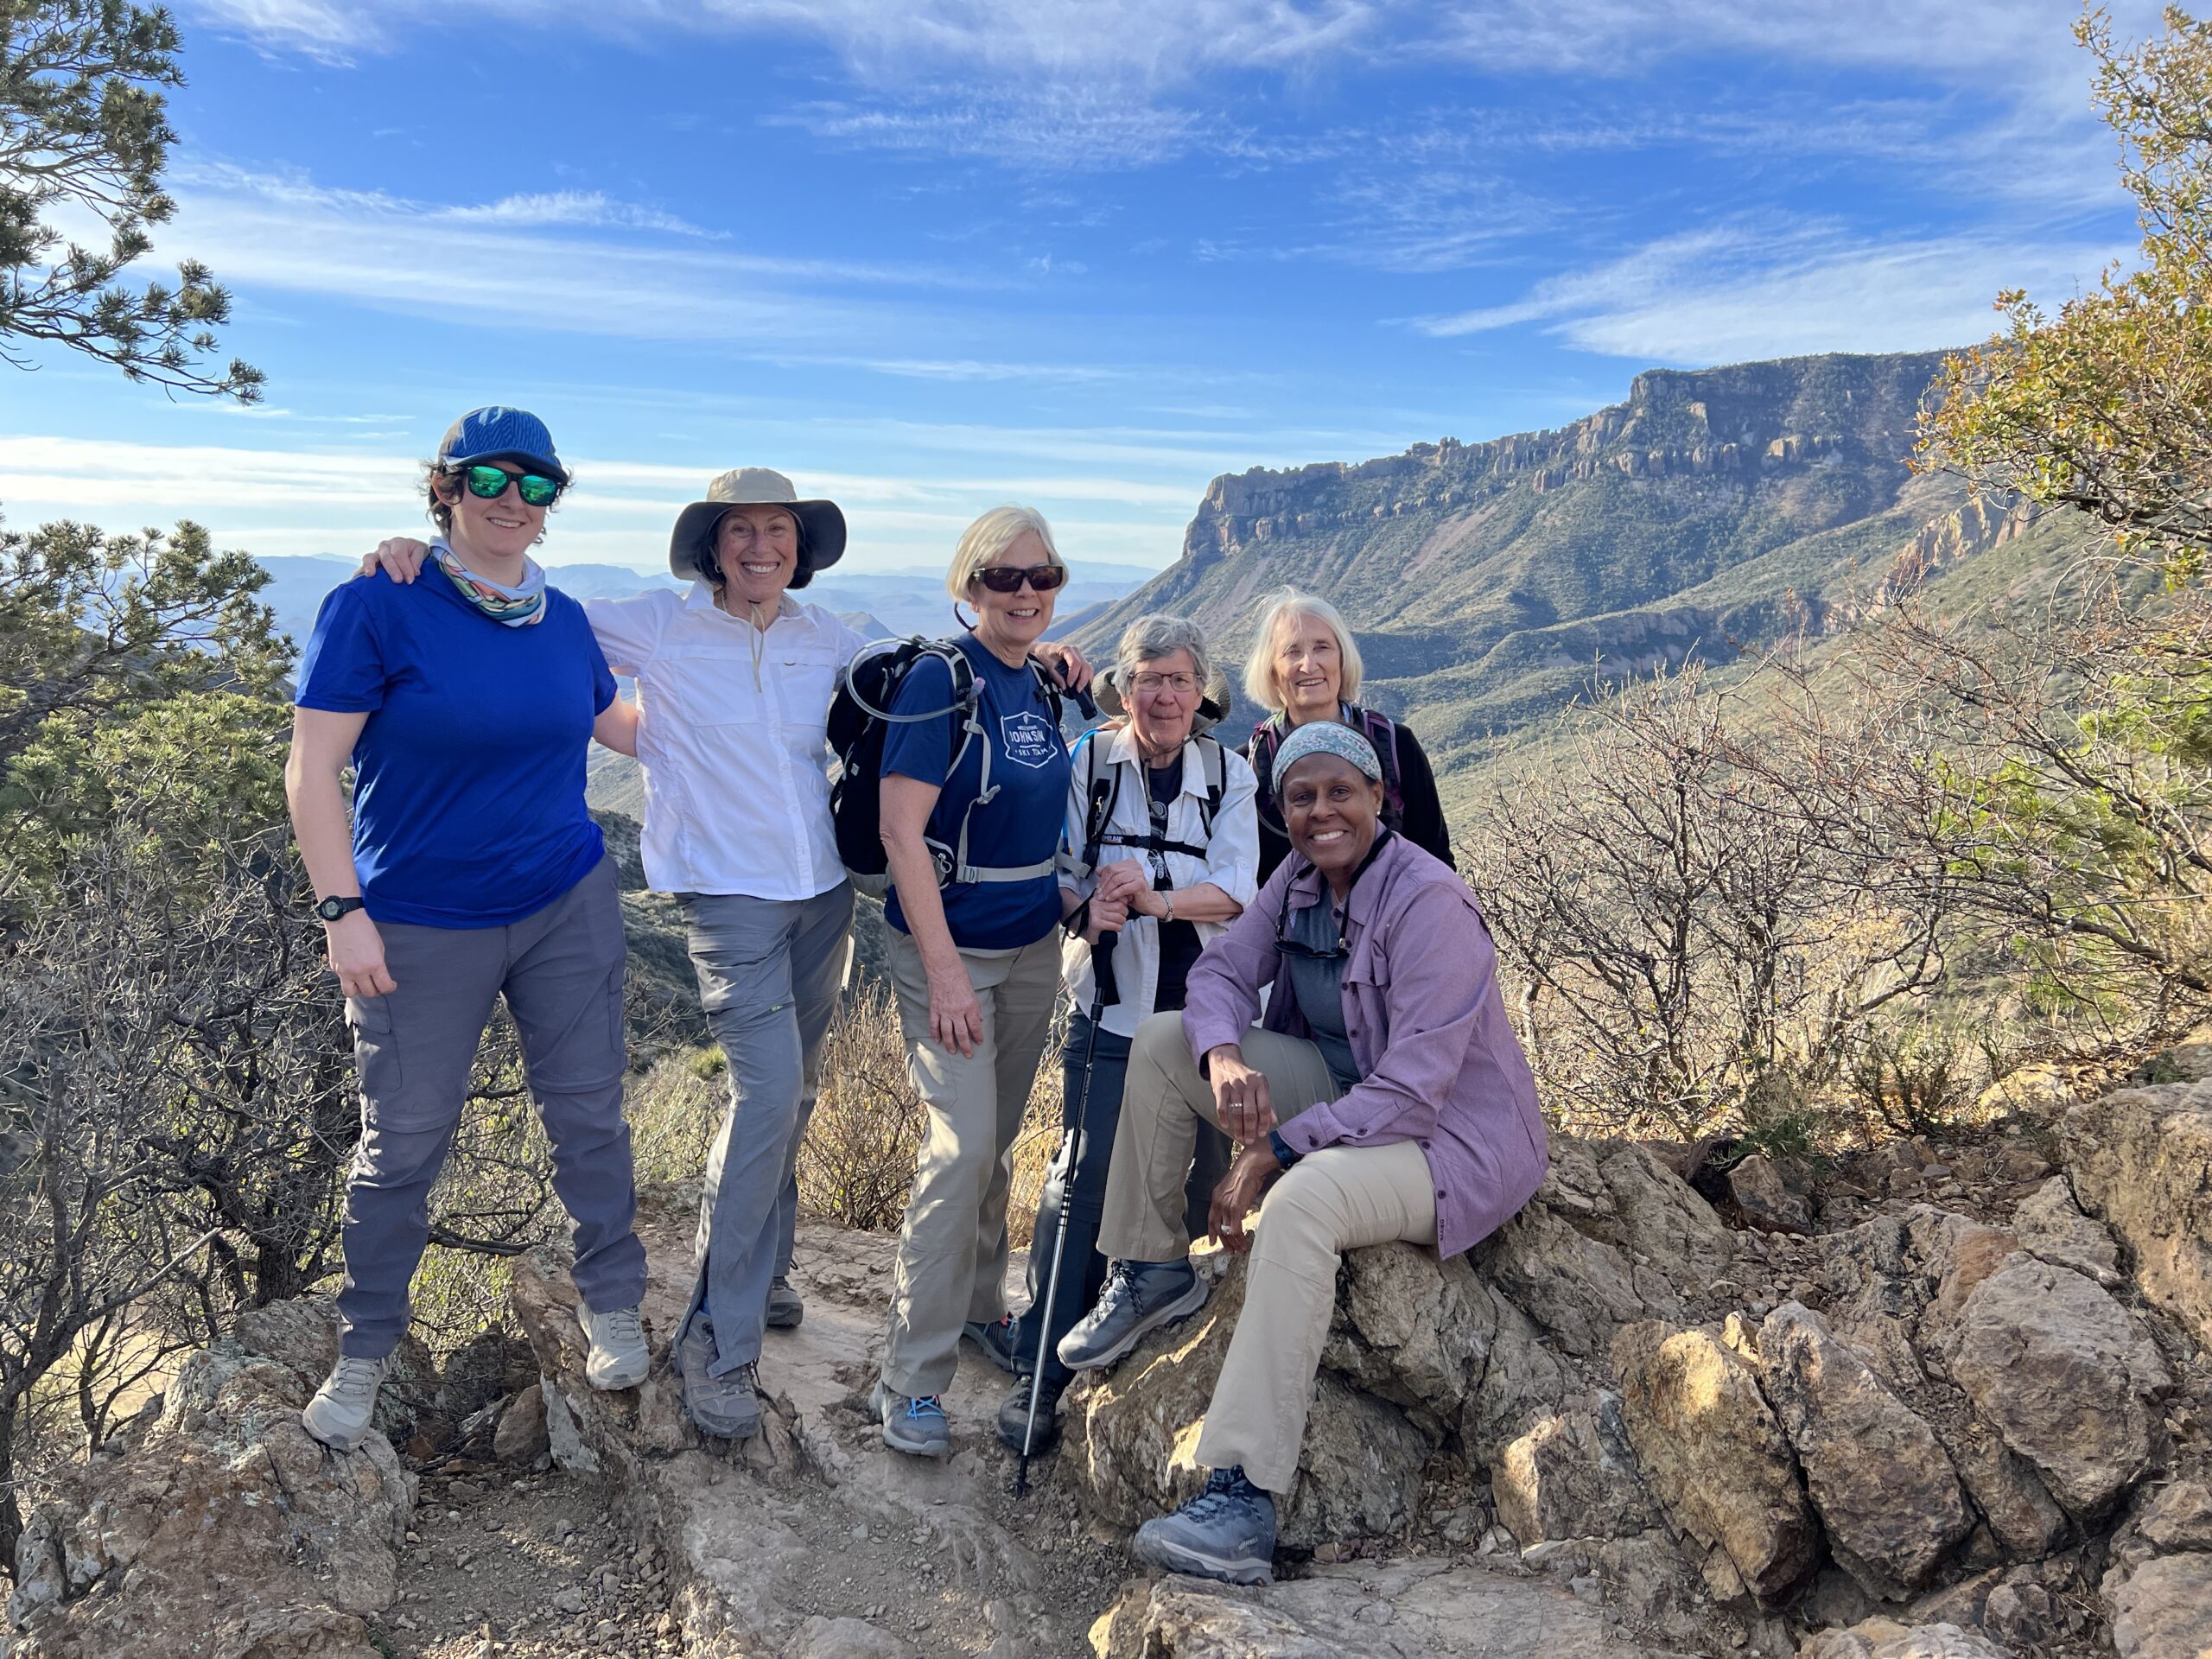 A smiling group of women pose for a photo with the picturesque mountains of the Big Bend region in the background - Big Bend Exploring and Hiking - Adventures in Good Company